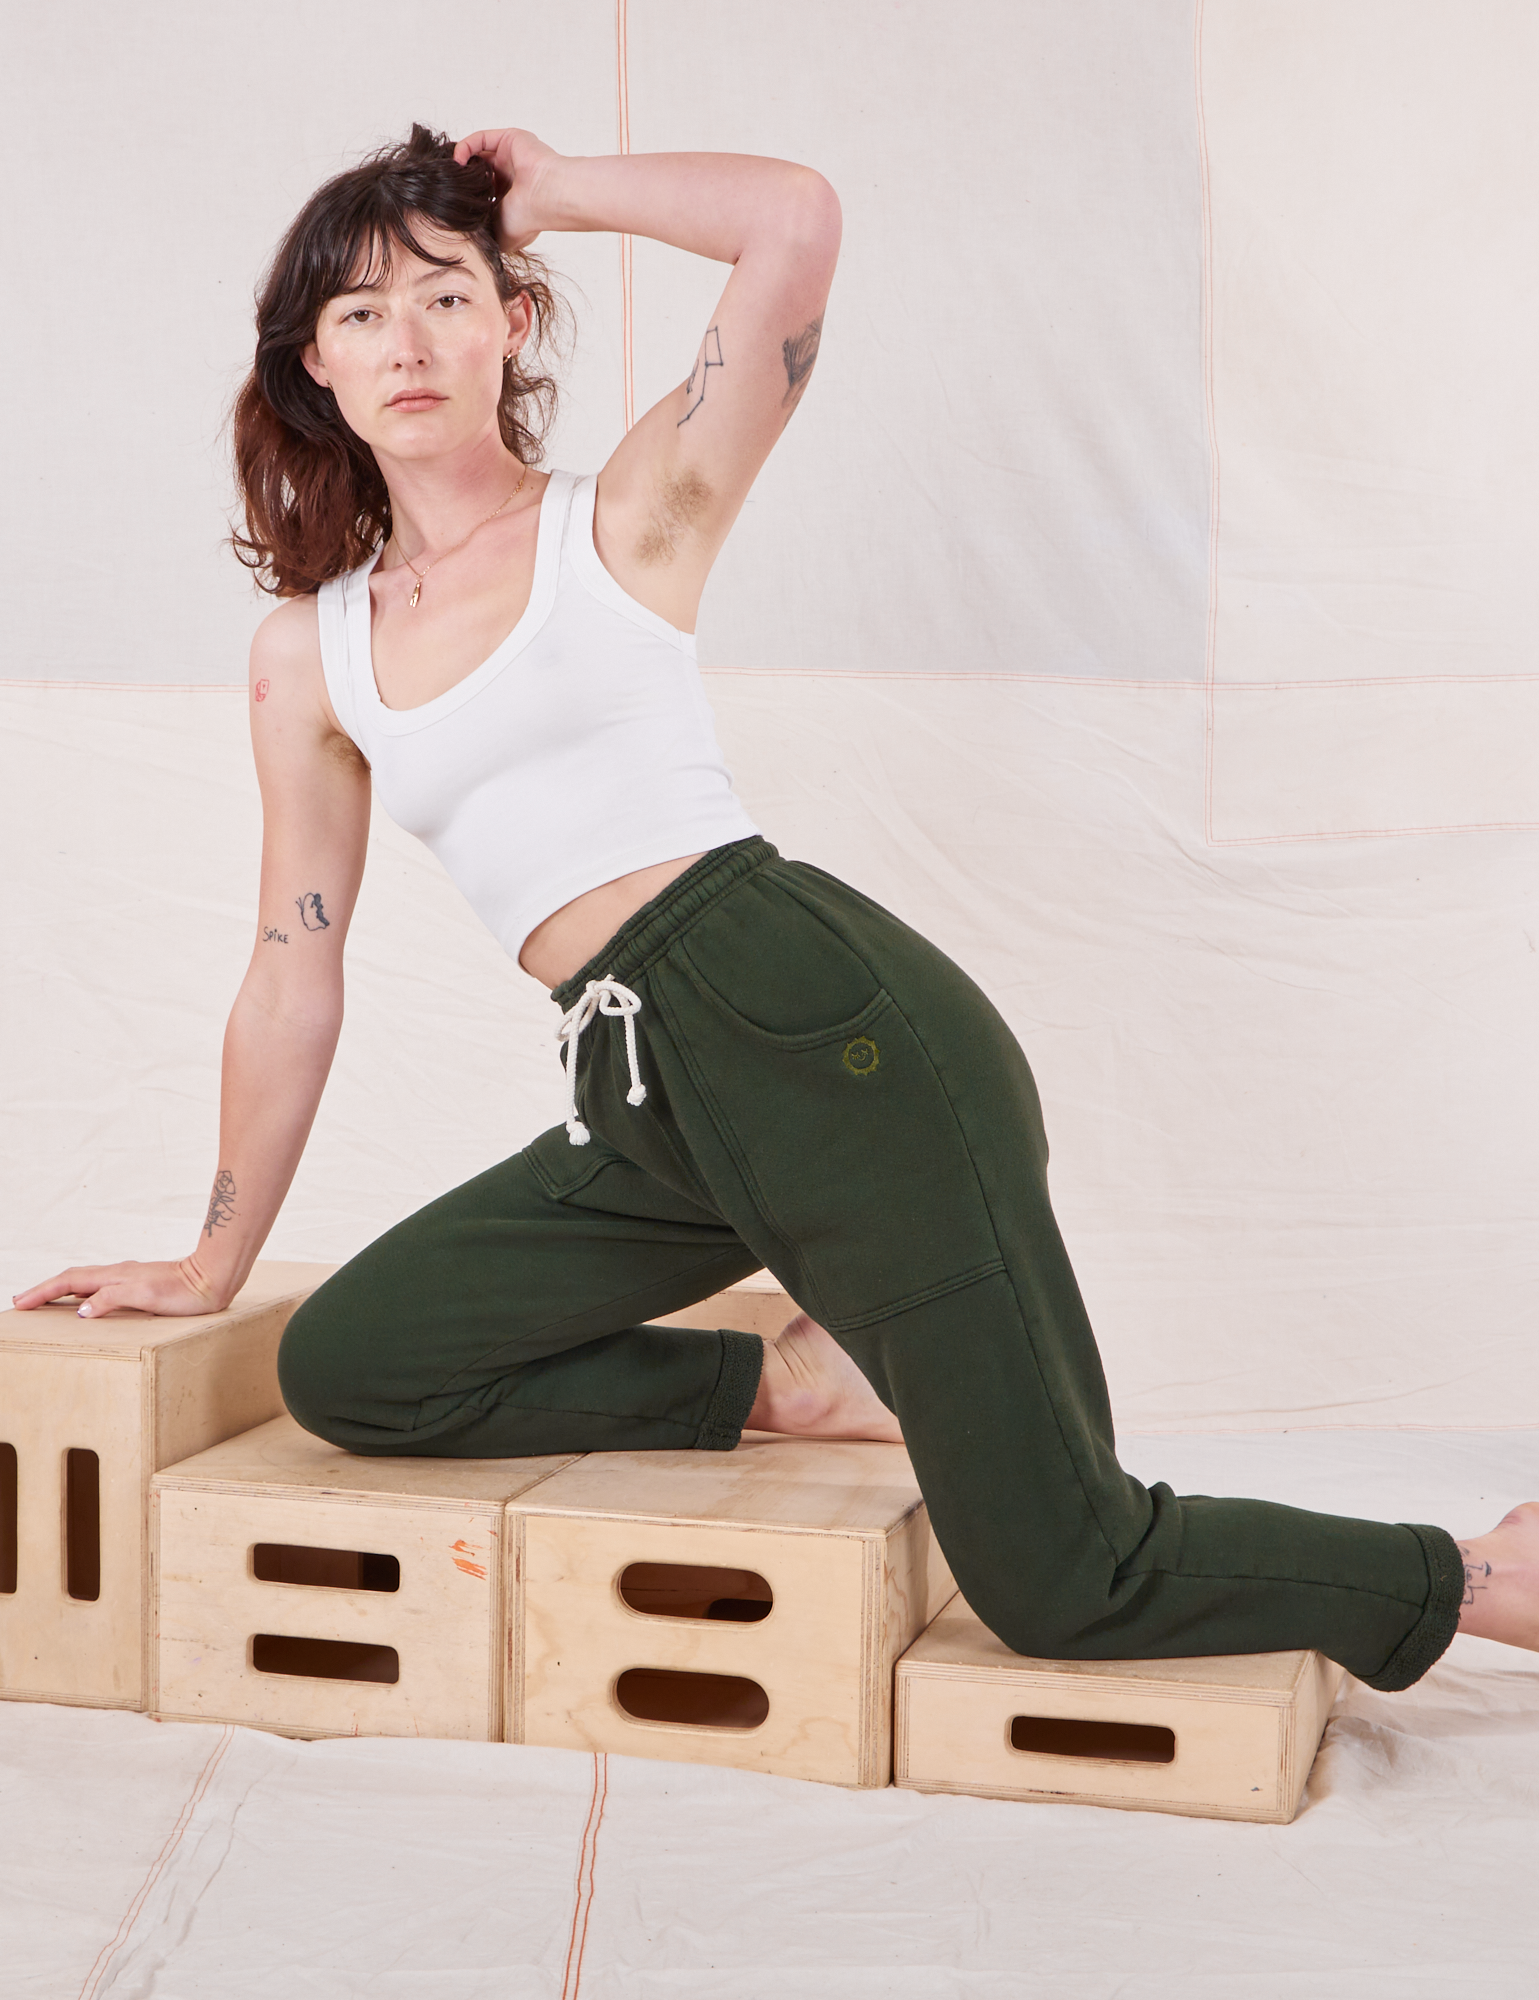 Alex is wearing Rolled Cuff Sweat Pants in Swamp Green and Cropped Tank in vintage tee off-white